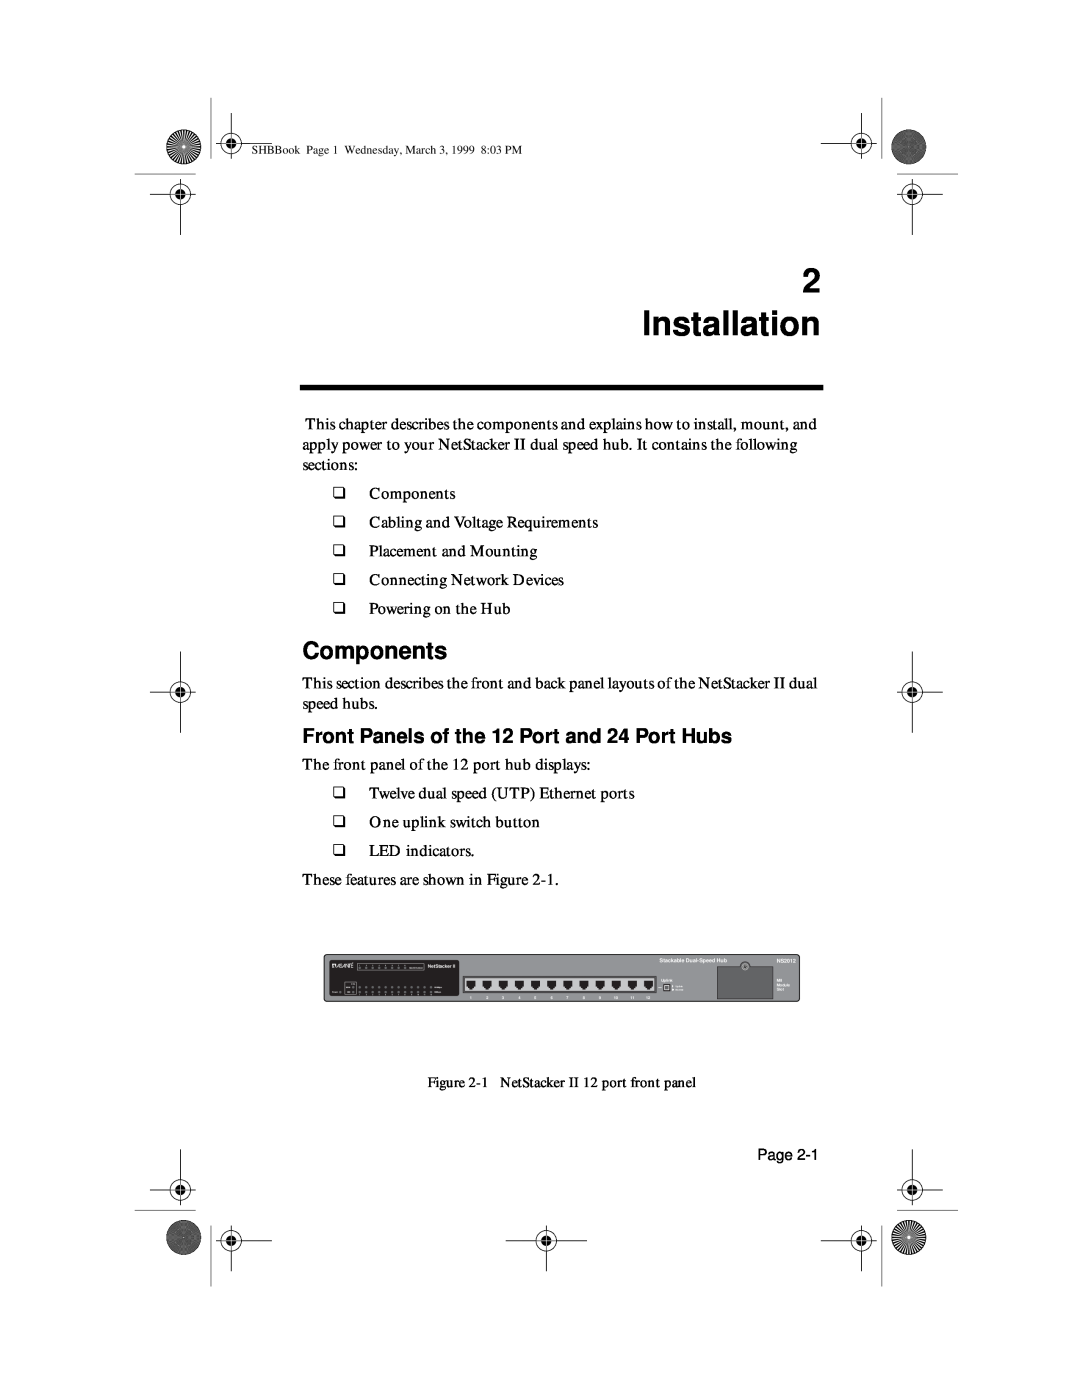 Asante Technologies II user manual Installation, Components, Front Panels of the 12 Port and 24 Port Hubs 